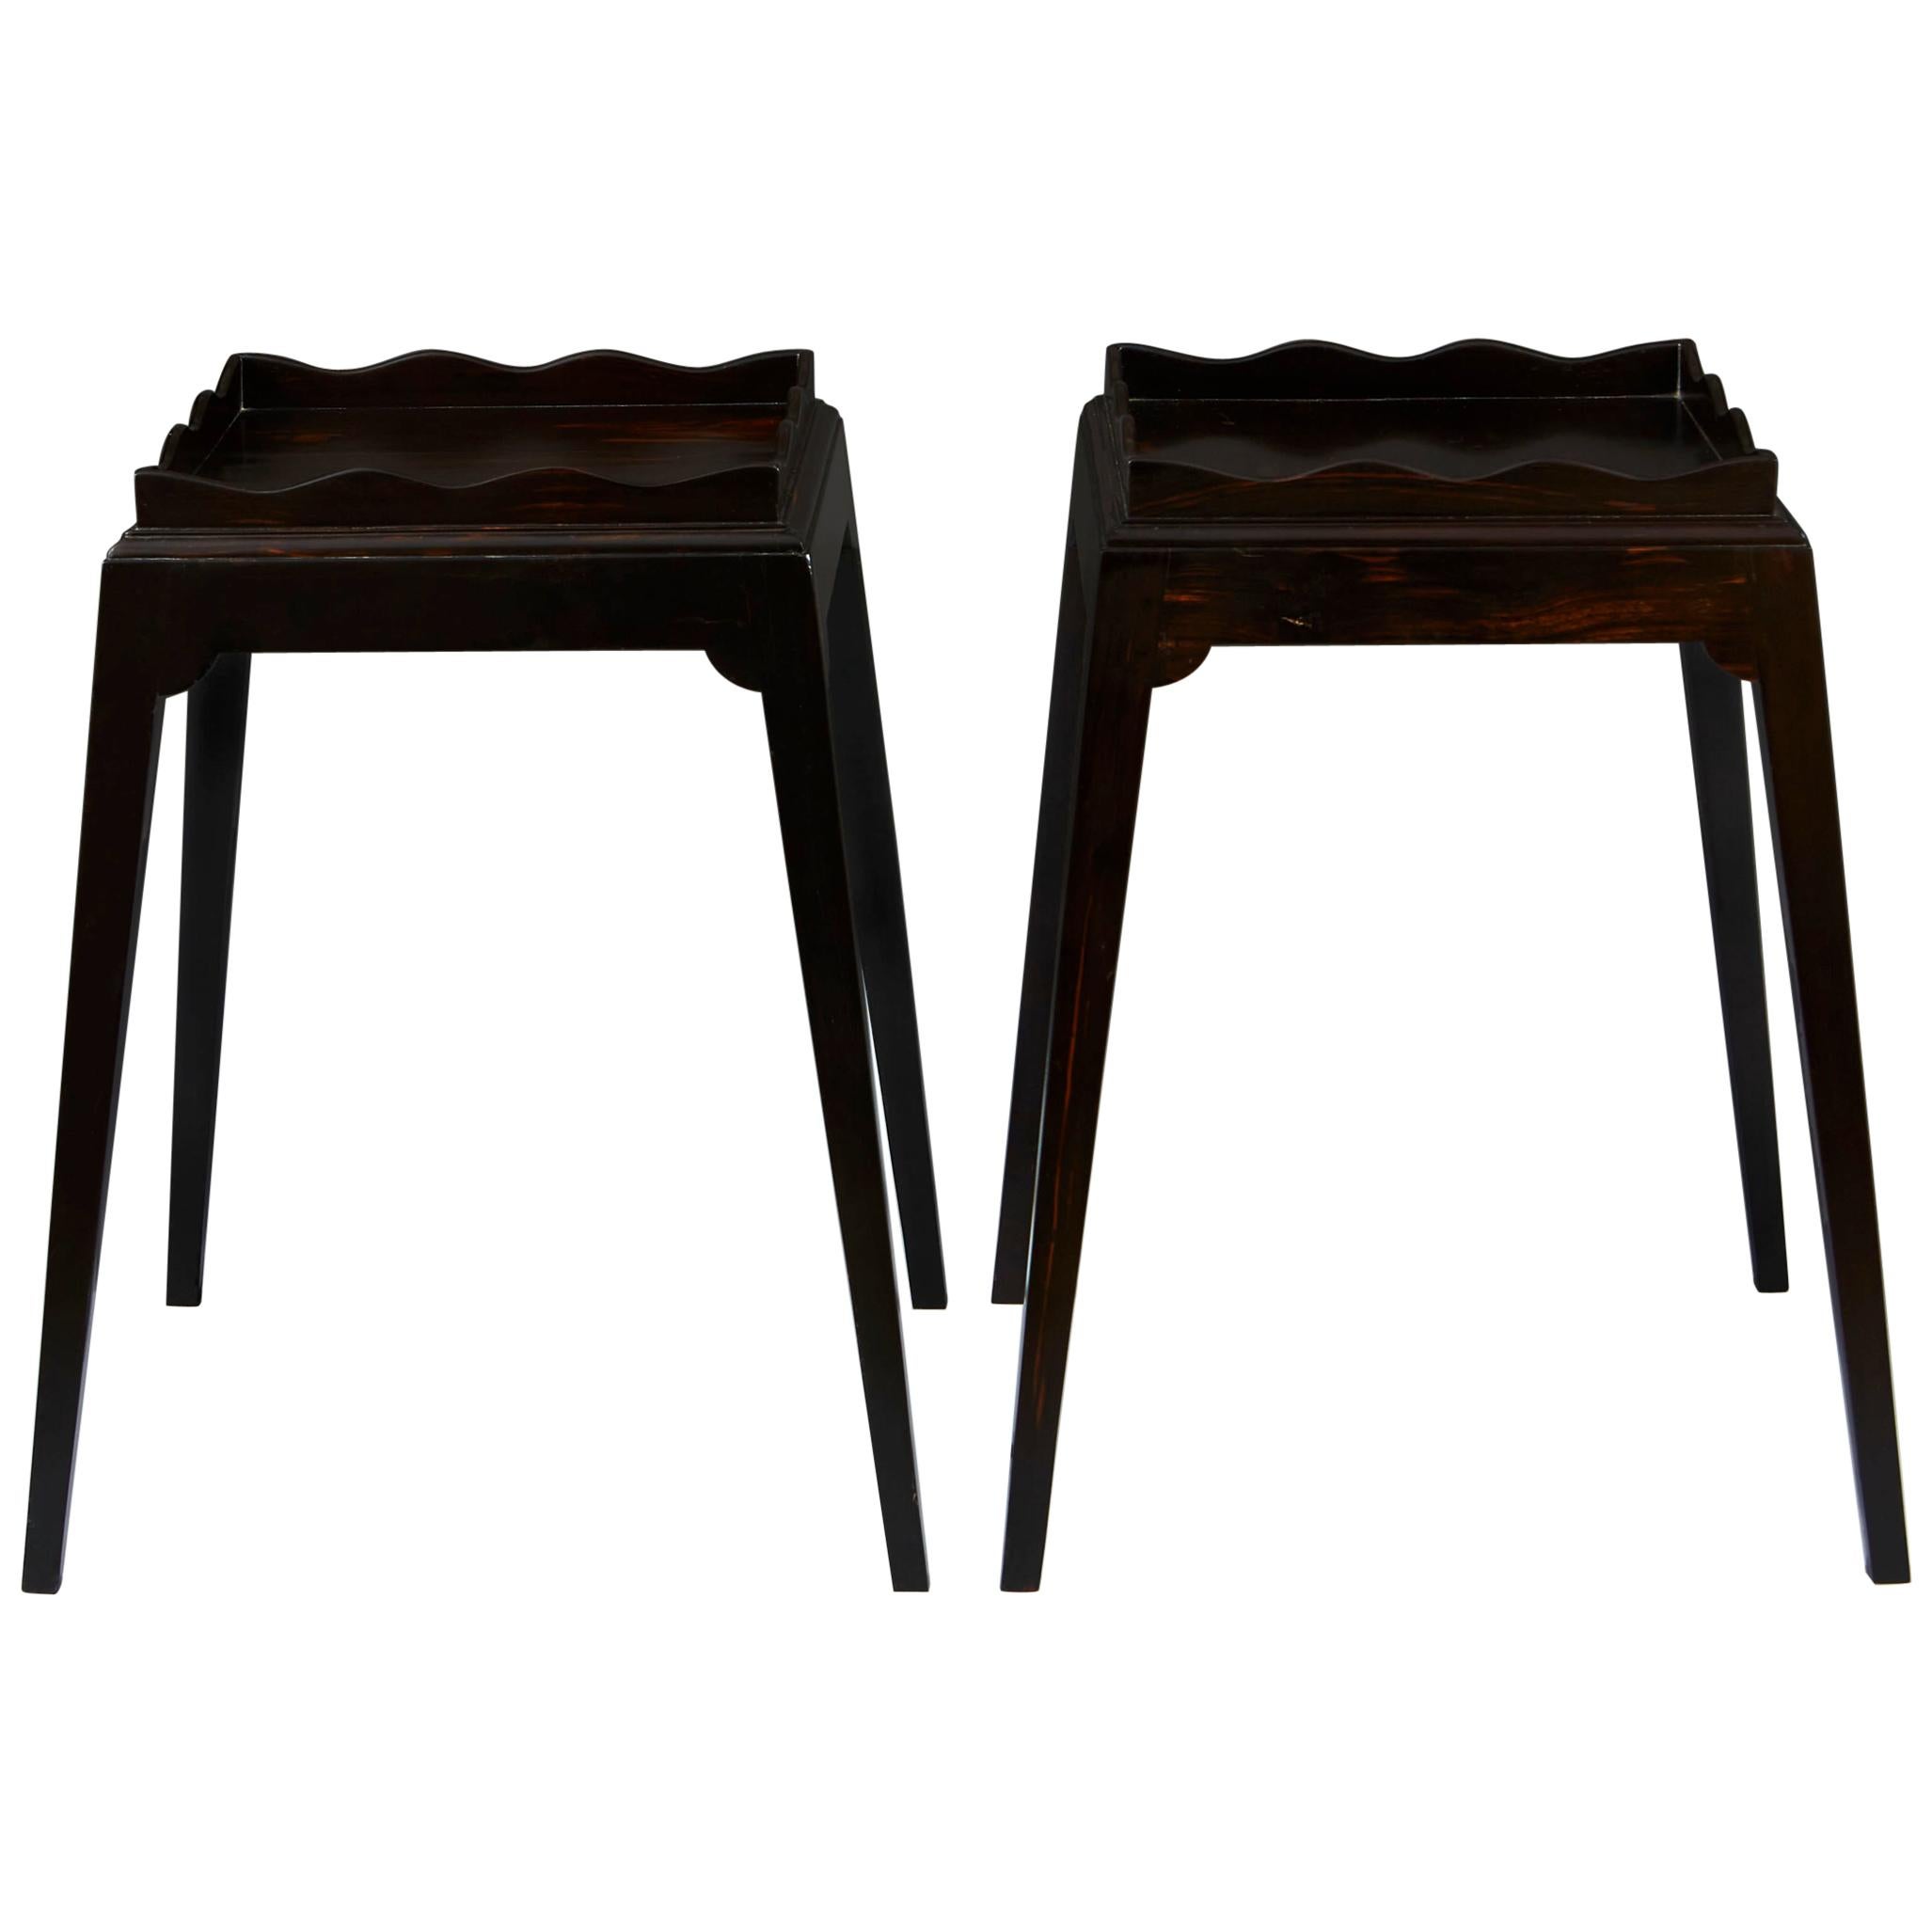 Pair of Mid-20th Century Ebony Tables with Undulating Galleries